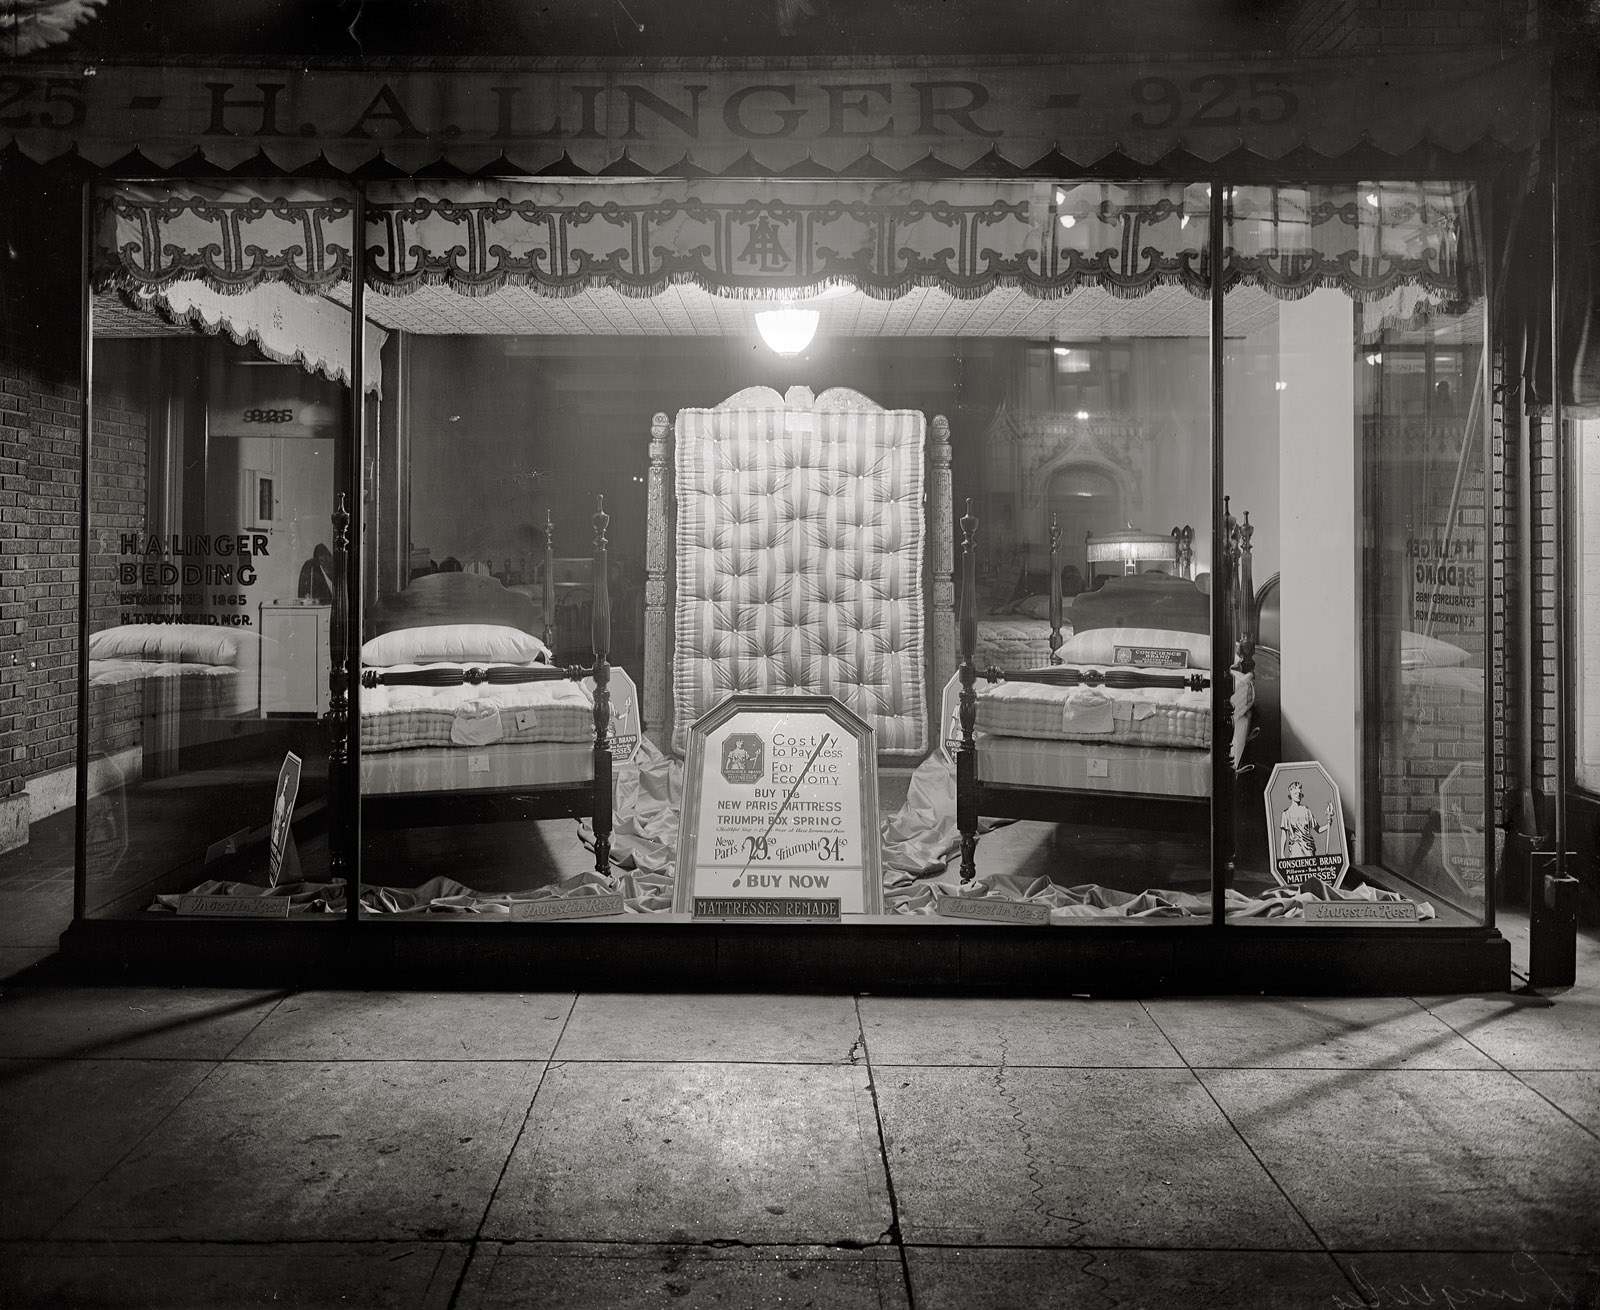 Washington circa 1925. "H.A. Linger window." Here we have a display for a brand of mattress called Conscience. Conscience wears a blindfold and carries a torch. ("Go ahead. Even if he loved me more. Live it up! I'll never tell. But you'll always know what you did.") Yes, it's the mattress for people who are always being asked how do they sleep at night. National Photo Co. glass negative. View full size.